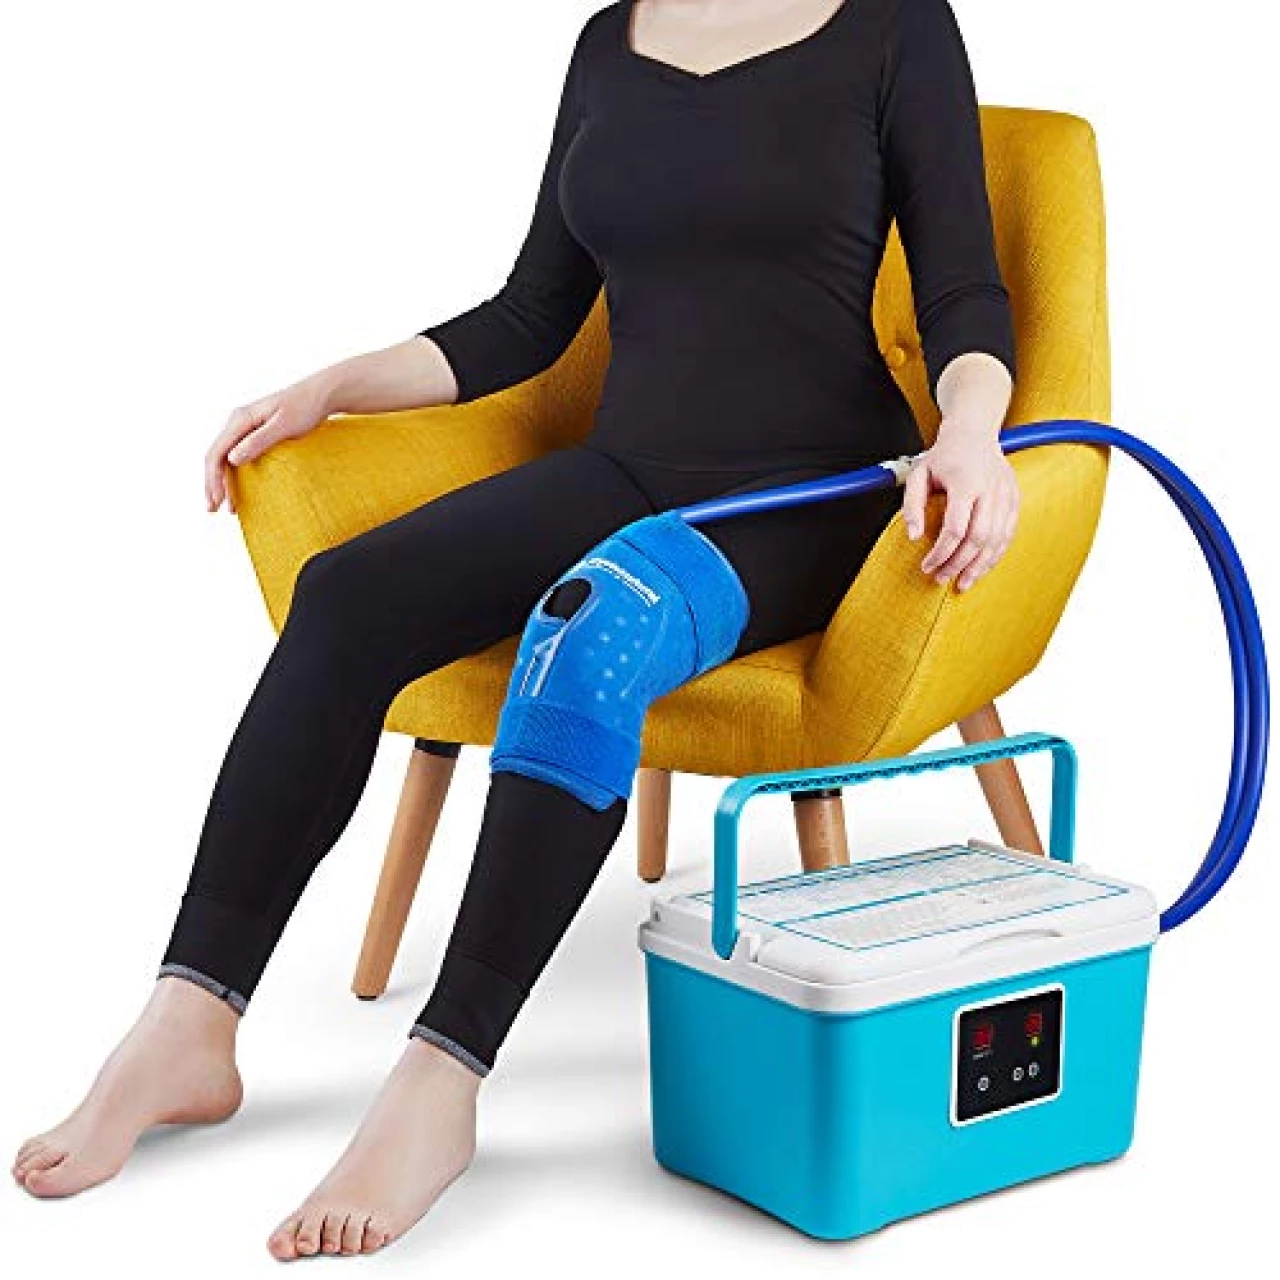 Cold Therapy Machine - Cryotherapy Freeze Kit System